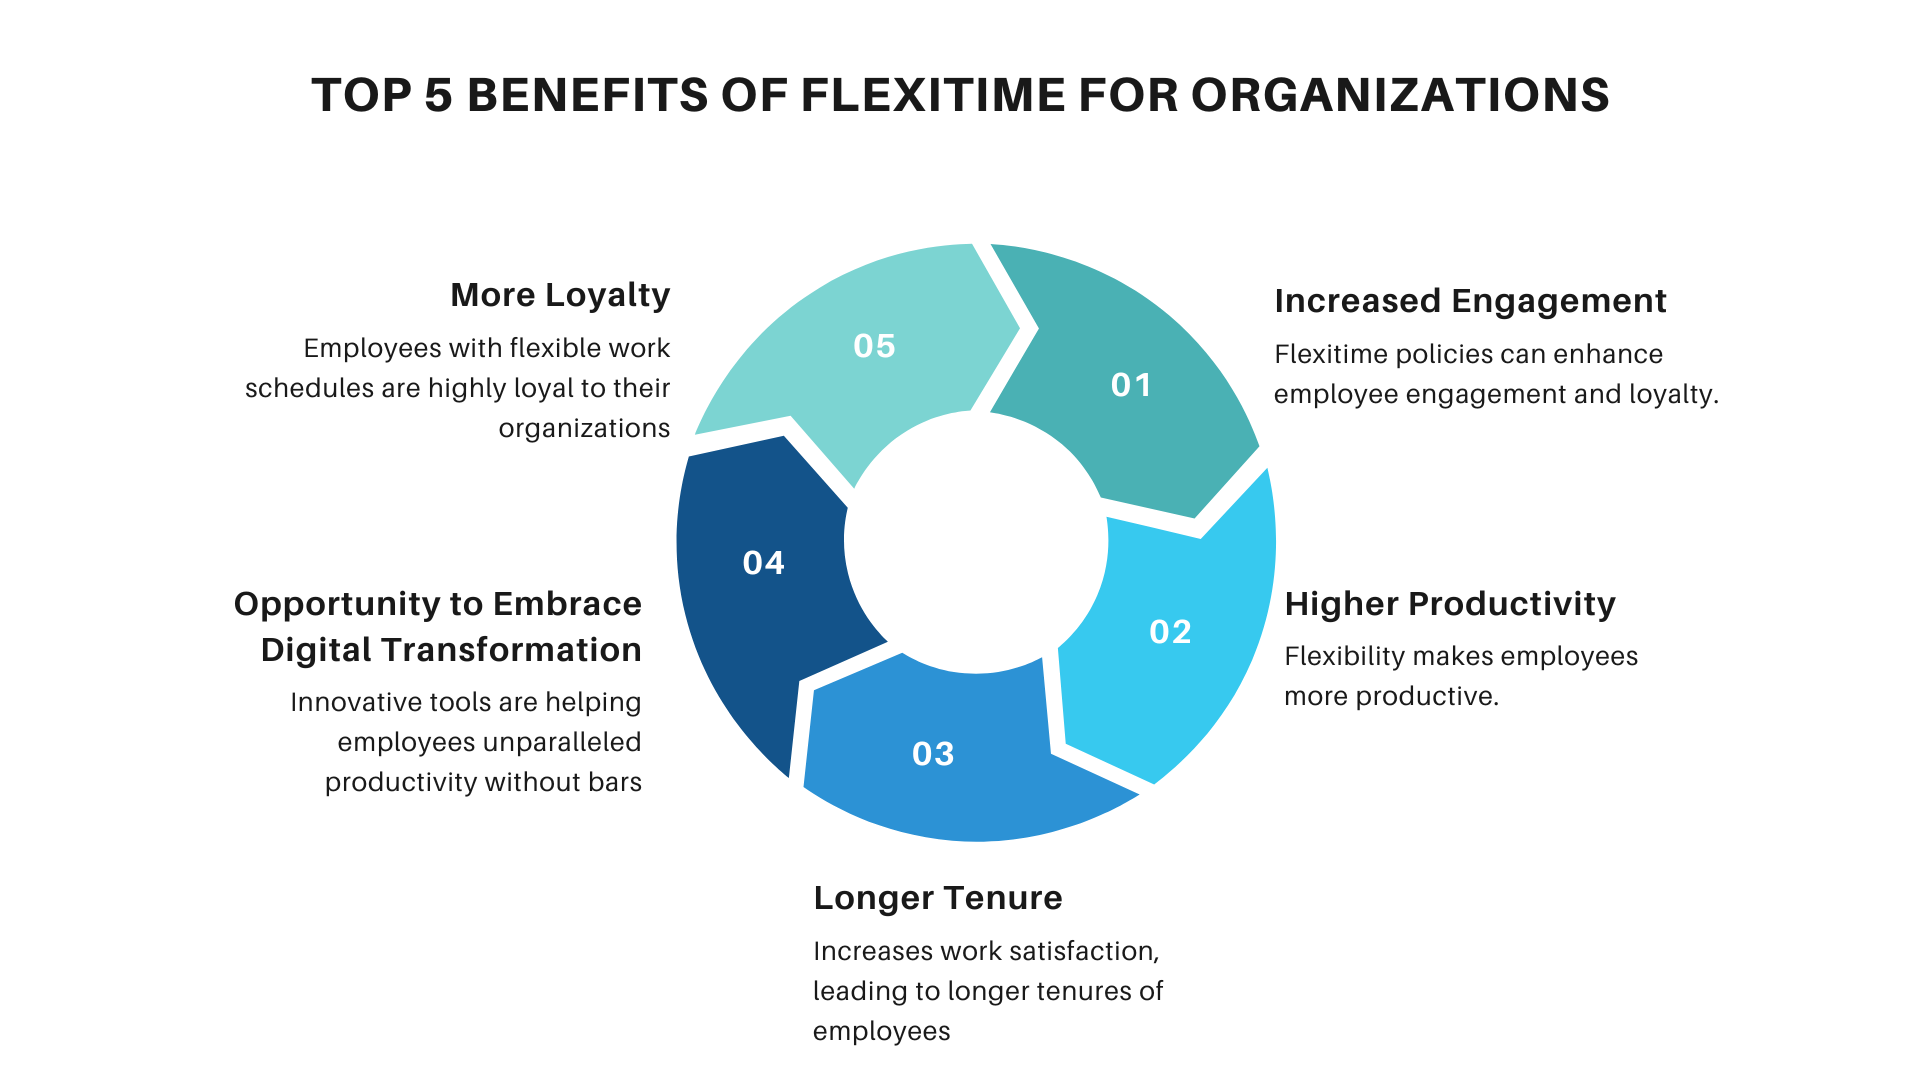 Top 5 Benefits of Flexitime for Organizations